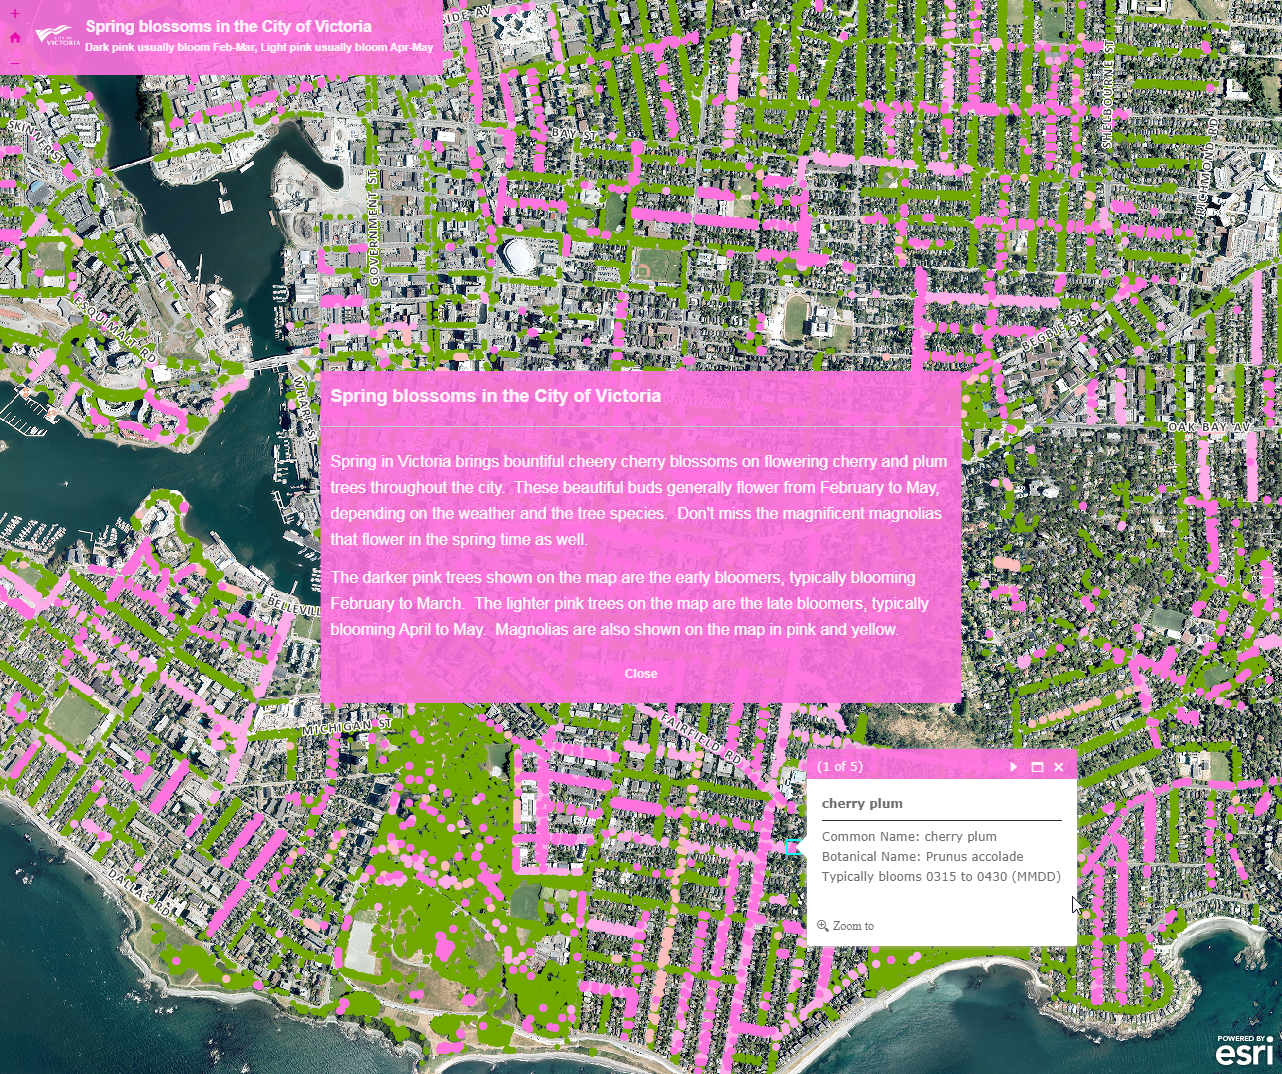 Spring blossoms in the City of Victoria – Victoria, Canada Launches Cherry Blossom Map